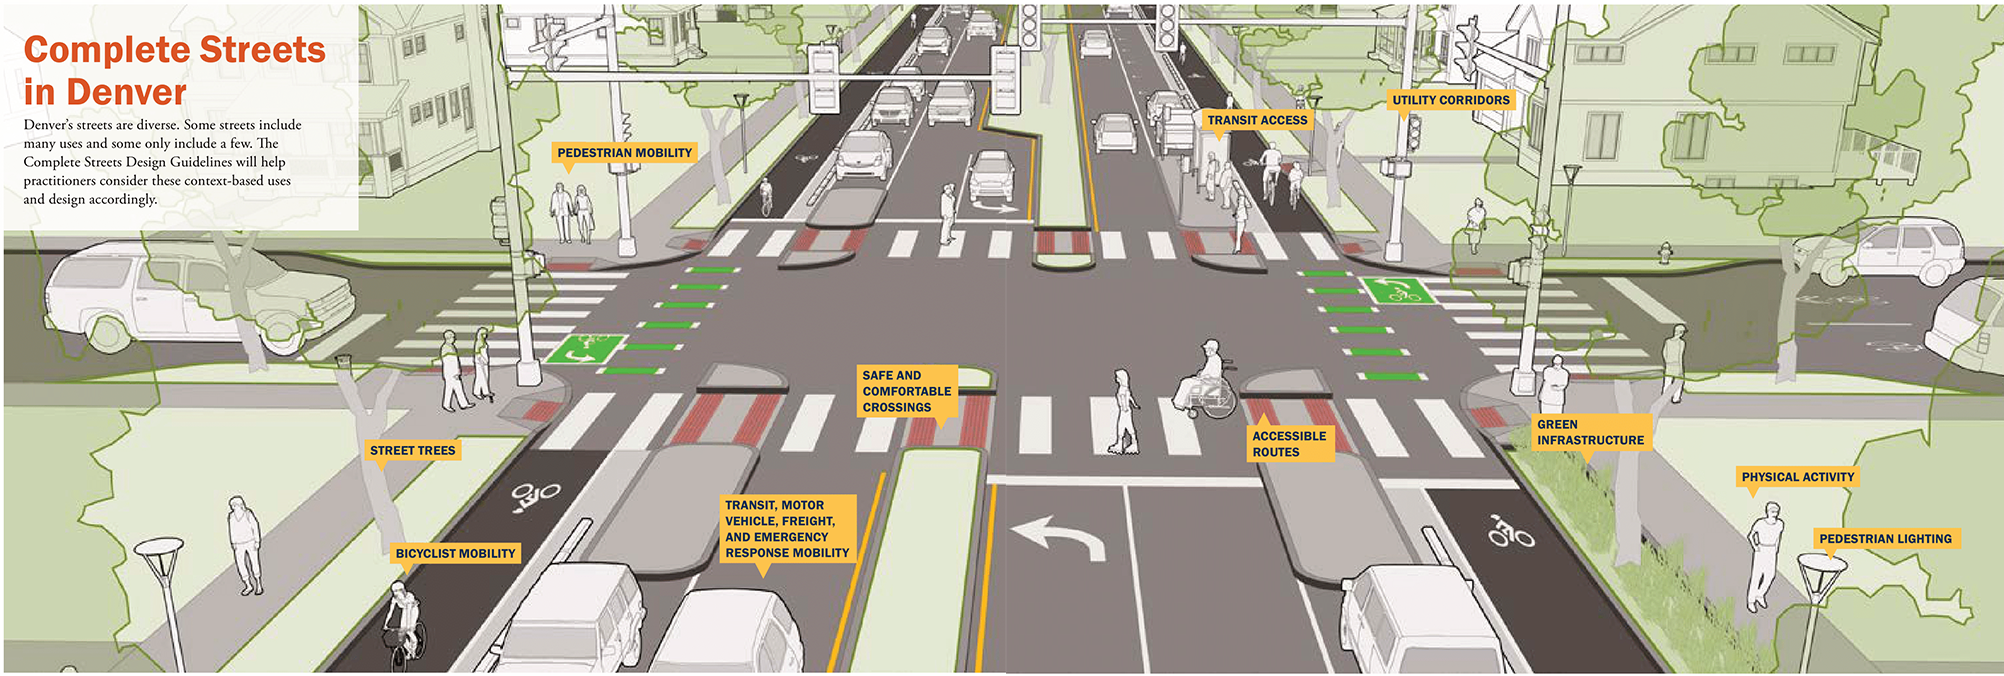 Illustration of an example of a Complete Street in Denver with street trees, bicyclist mobility, transit lanes, safe and comfortable crossings, accessible route, green infrastructure, and pedestrian lighting